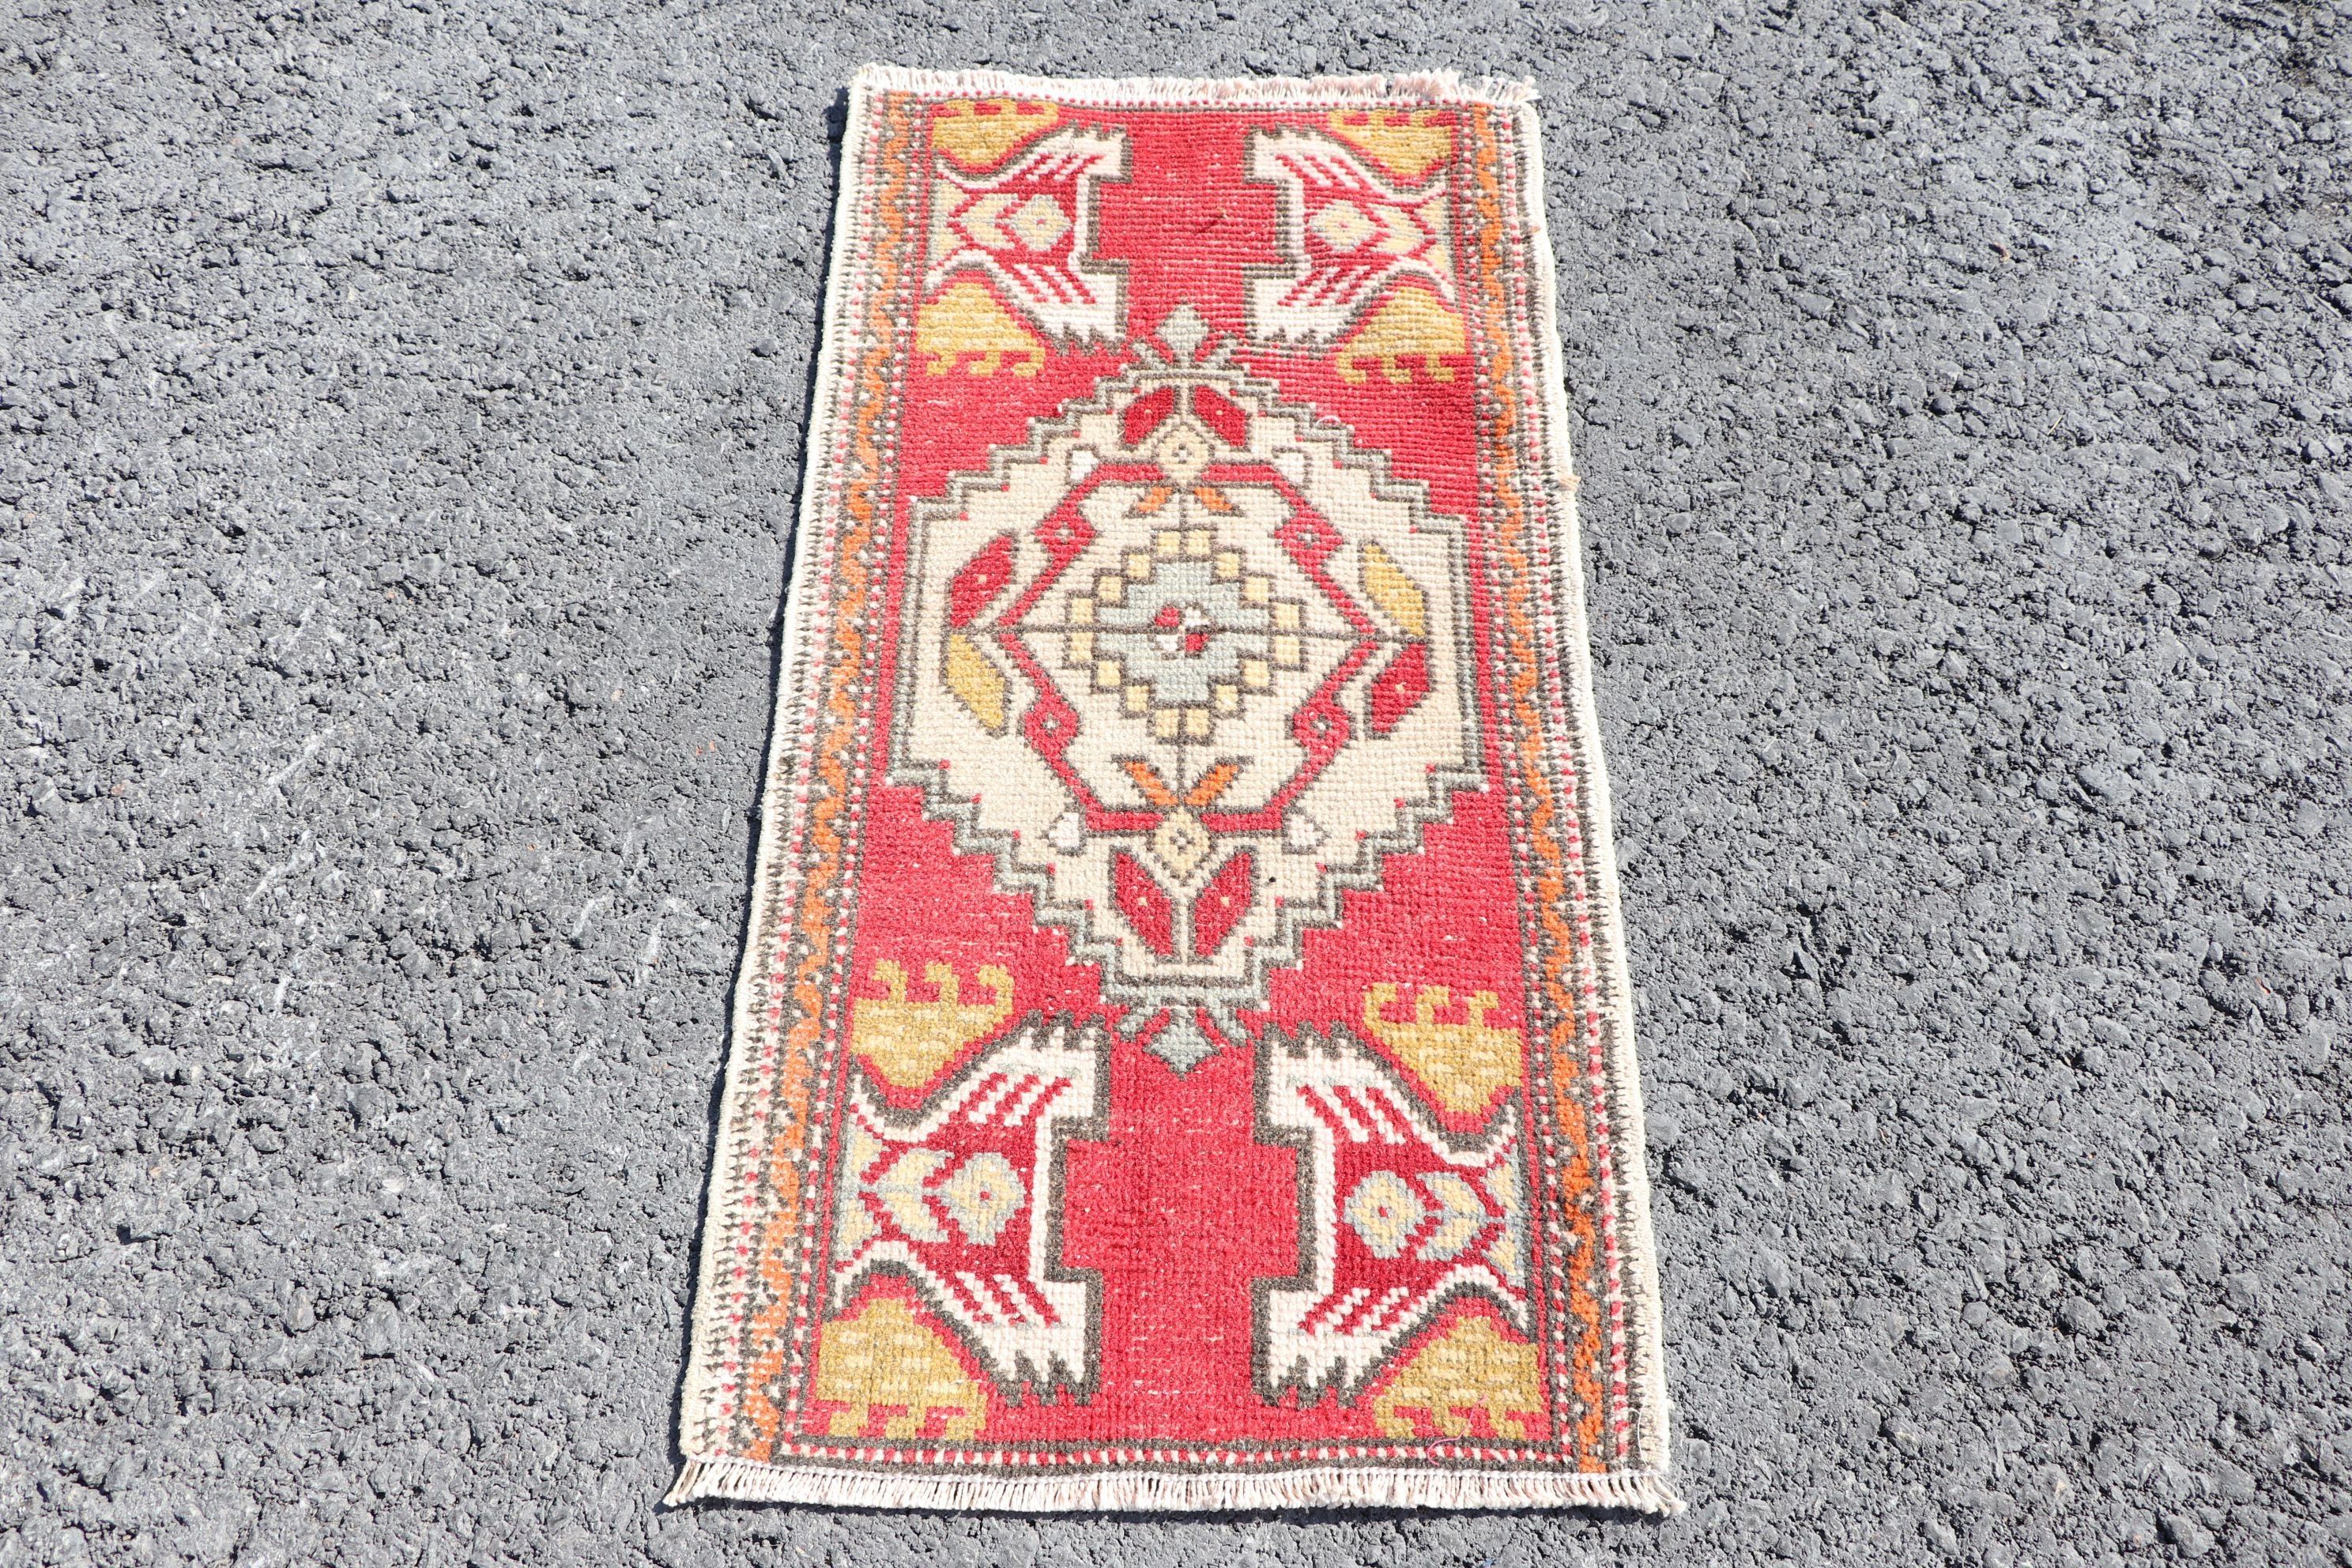 Boho Rugs, Vintage Rug, Oriental Rugs, Cool Rug, Rugs for Wall Hanging, Kitchen Rugs, Red Bedroom Rug, Turkish Rugs, 1.5x2.9 ft Small Rug